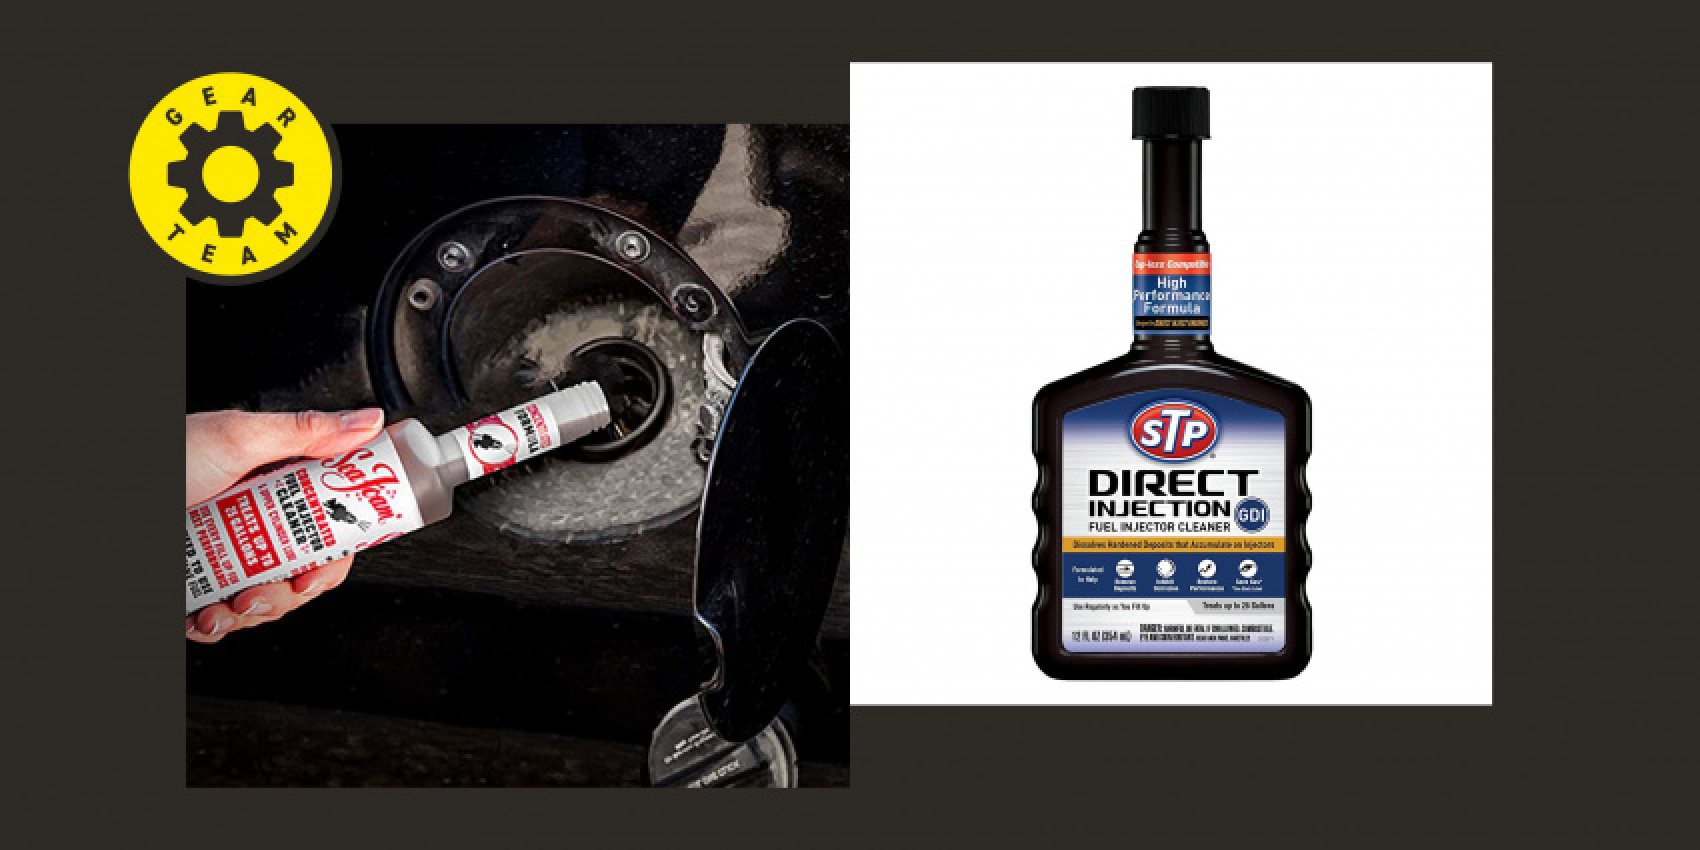 autos, cars, gear, amazon, better gas mileage, fuel injector, fuel injector cleaners, improve mileage, mpg, amazon, fuel injector cleaners: snake oil or mileage booster?